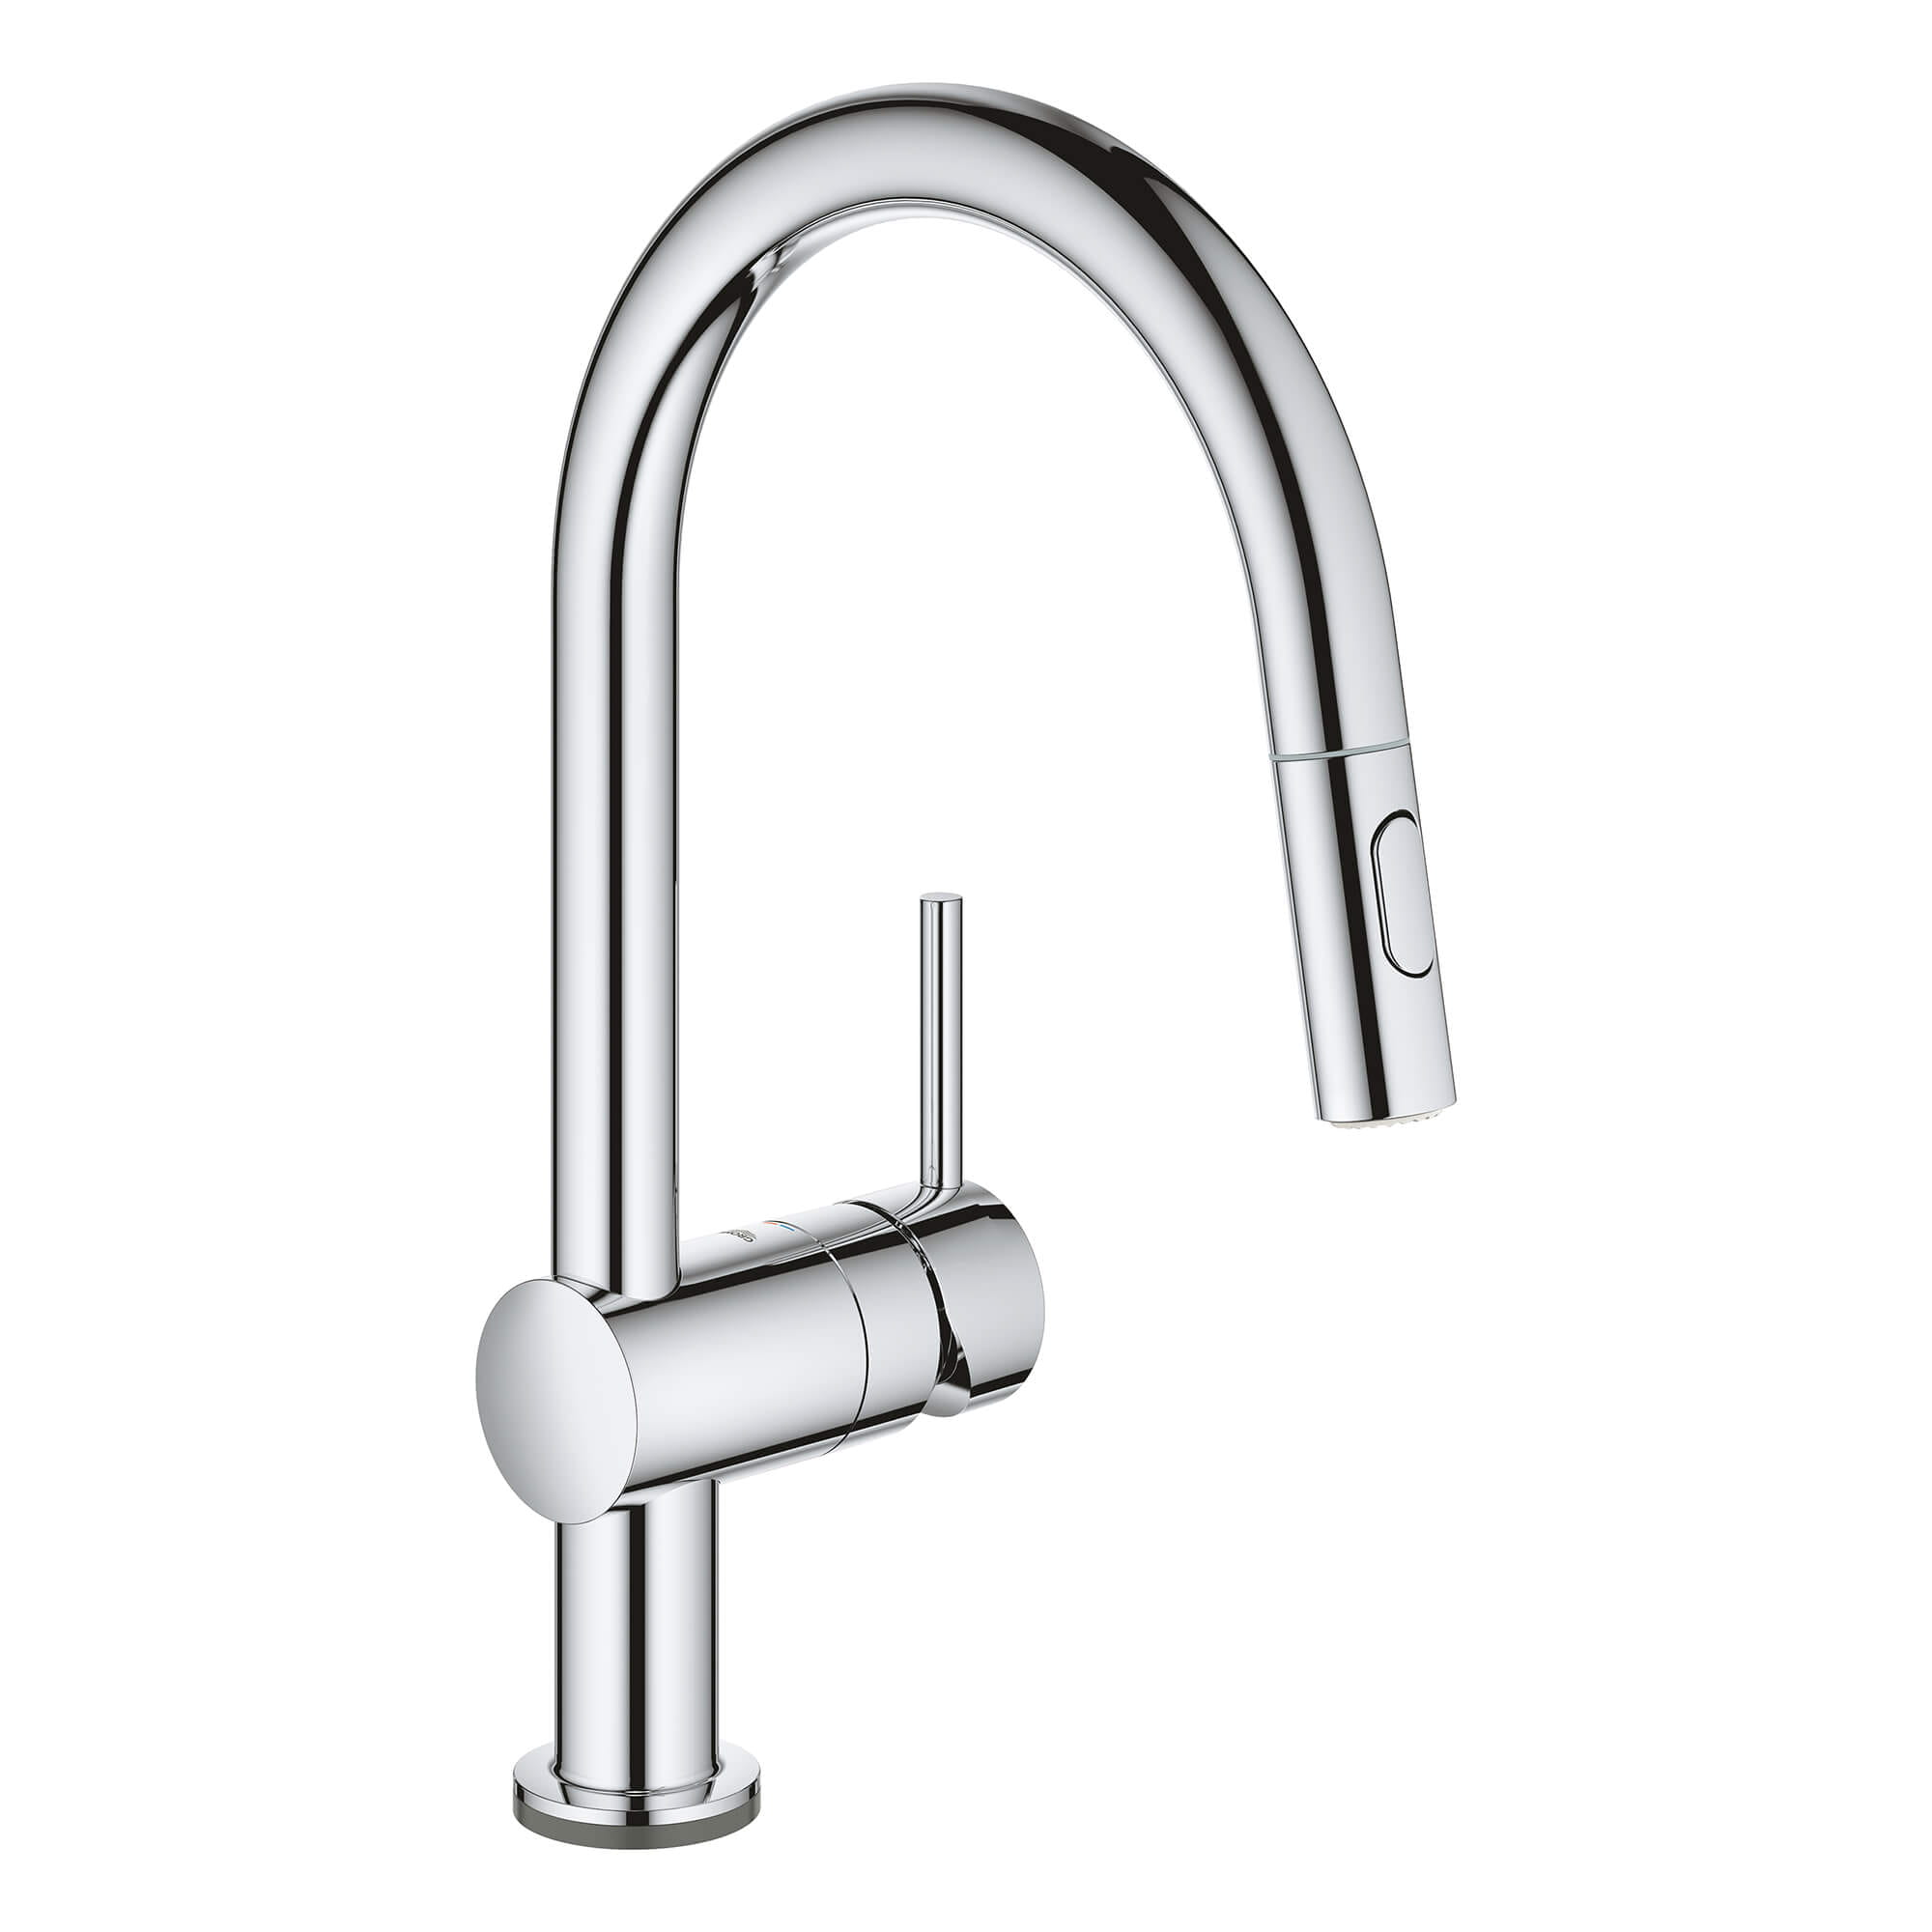 MINTA®  SINGLE-HANDLE PULL DOWN KITCHEN FAUCET DUAL SPRAY 1.75 GPM WITH TOUCH TECHNOLOGY Model: 31359002-related